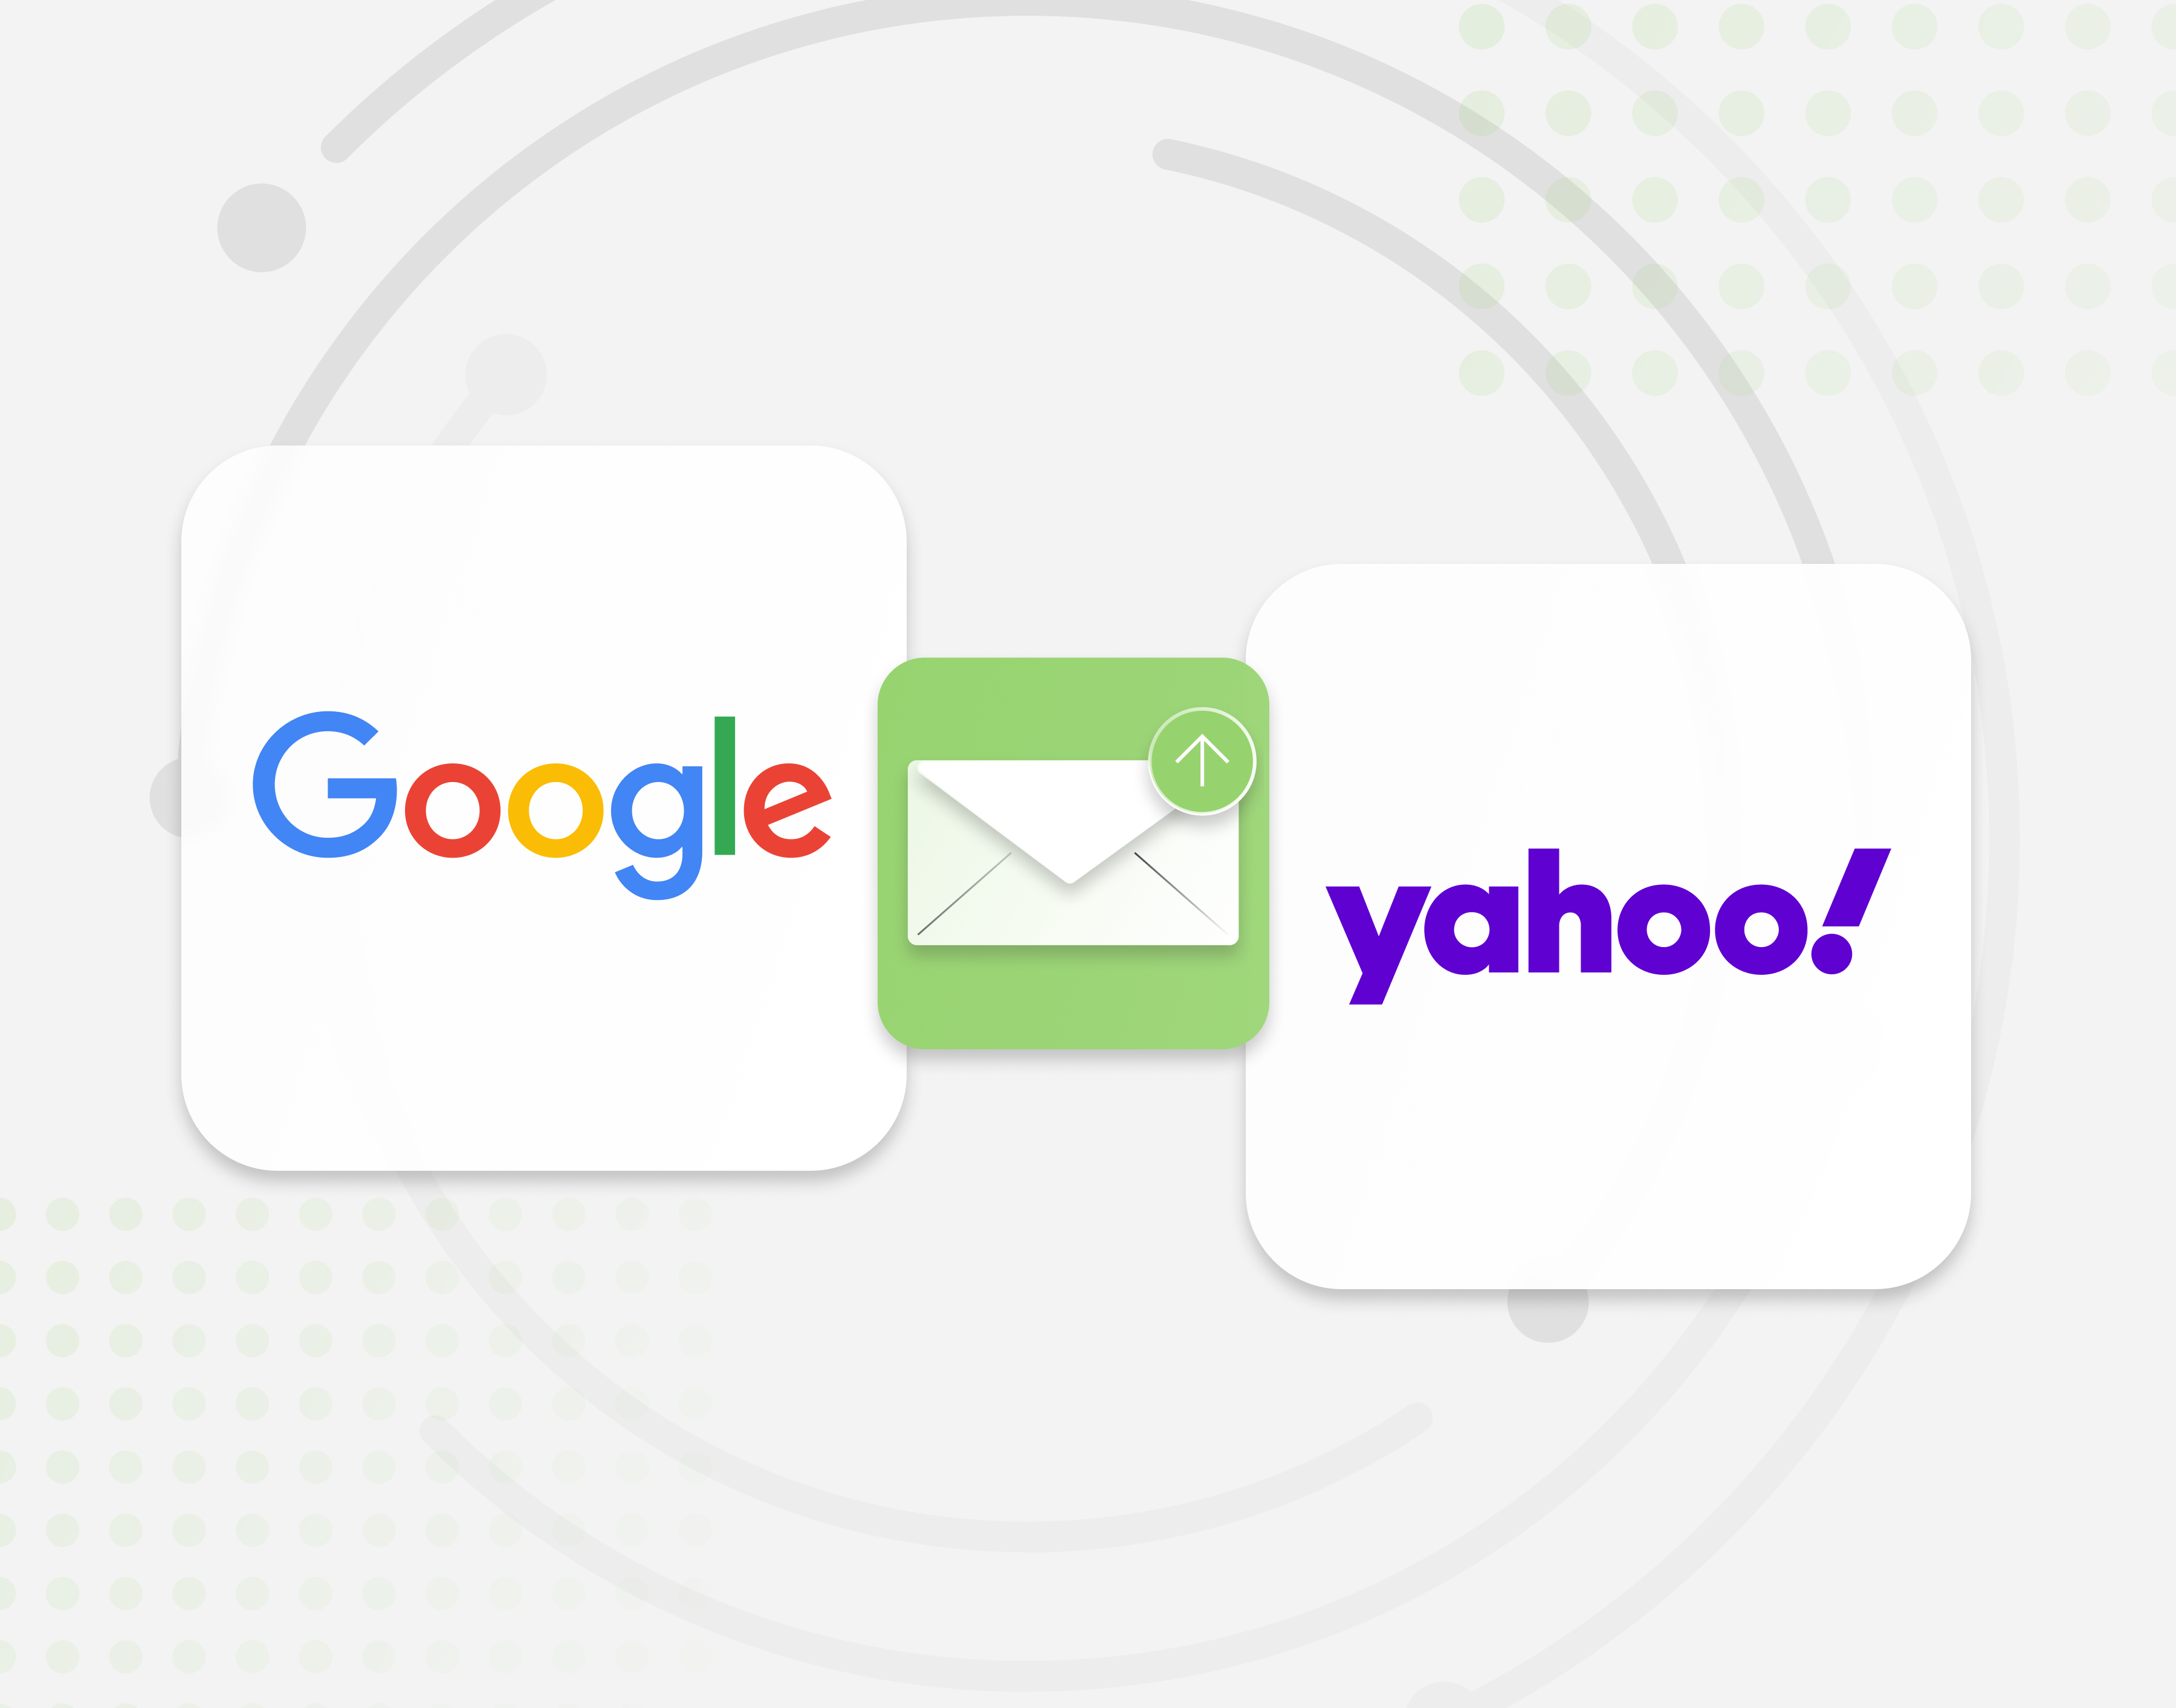 Google and Yahoo announce new requirements for email delivery - Red Sift  Blog